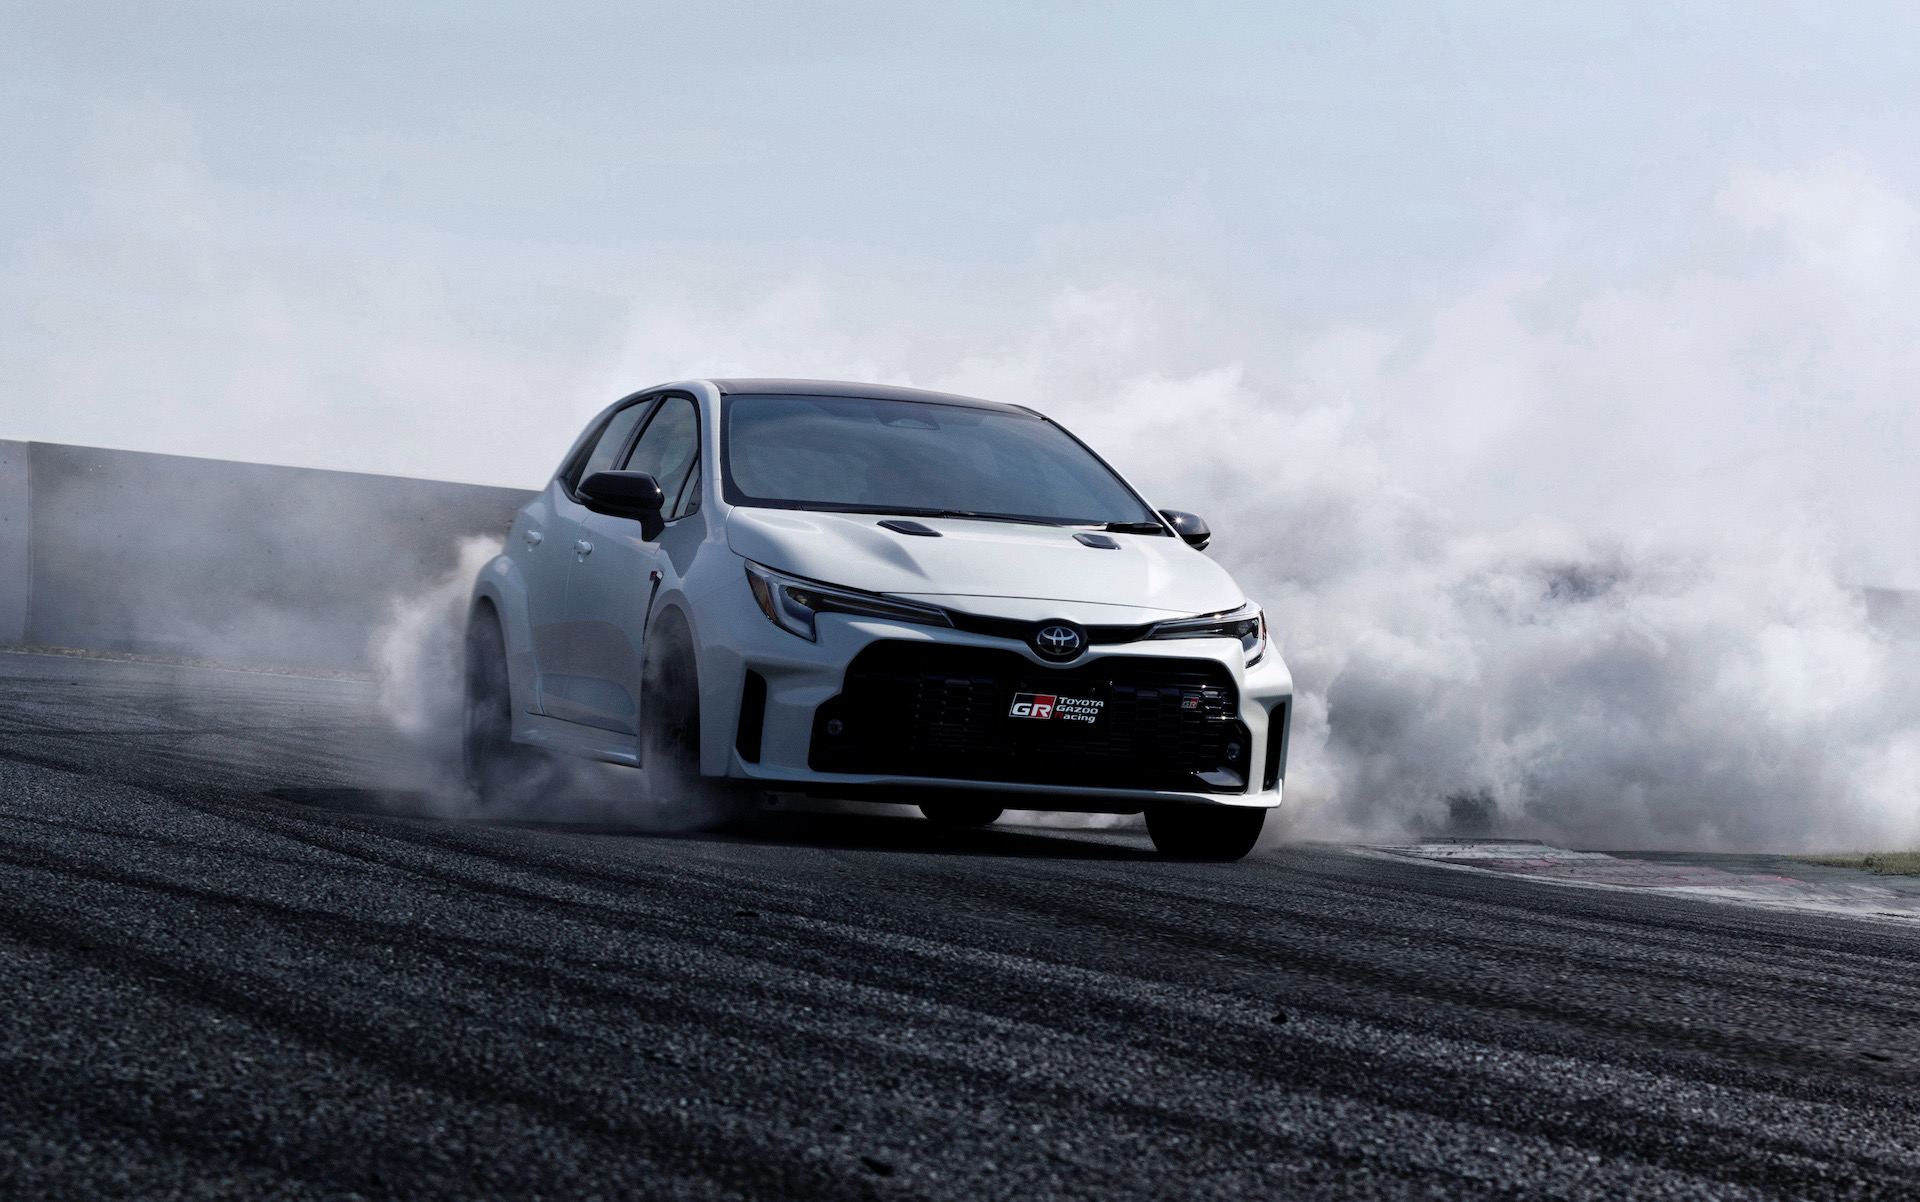 All-new Toyota GR Corolla hot hatch revealed, confirmed for Australia